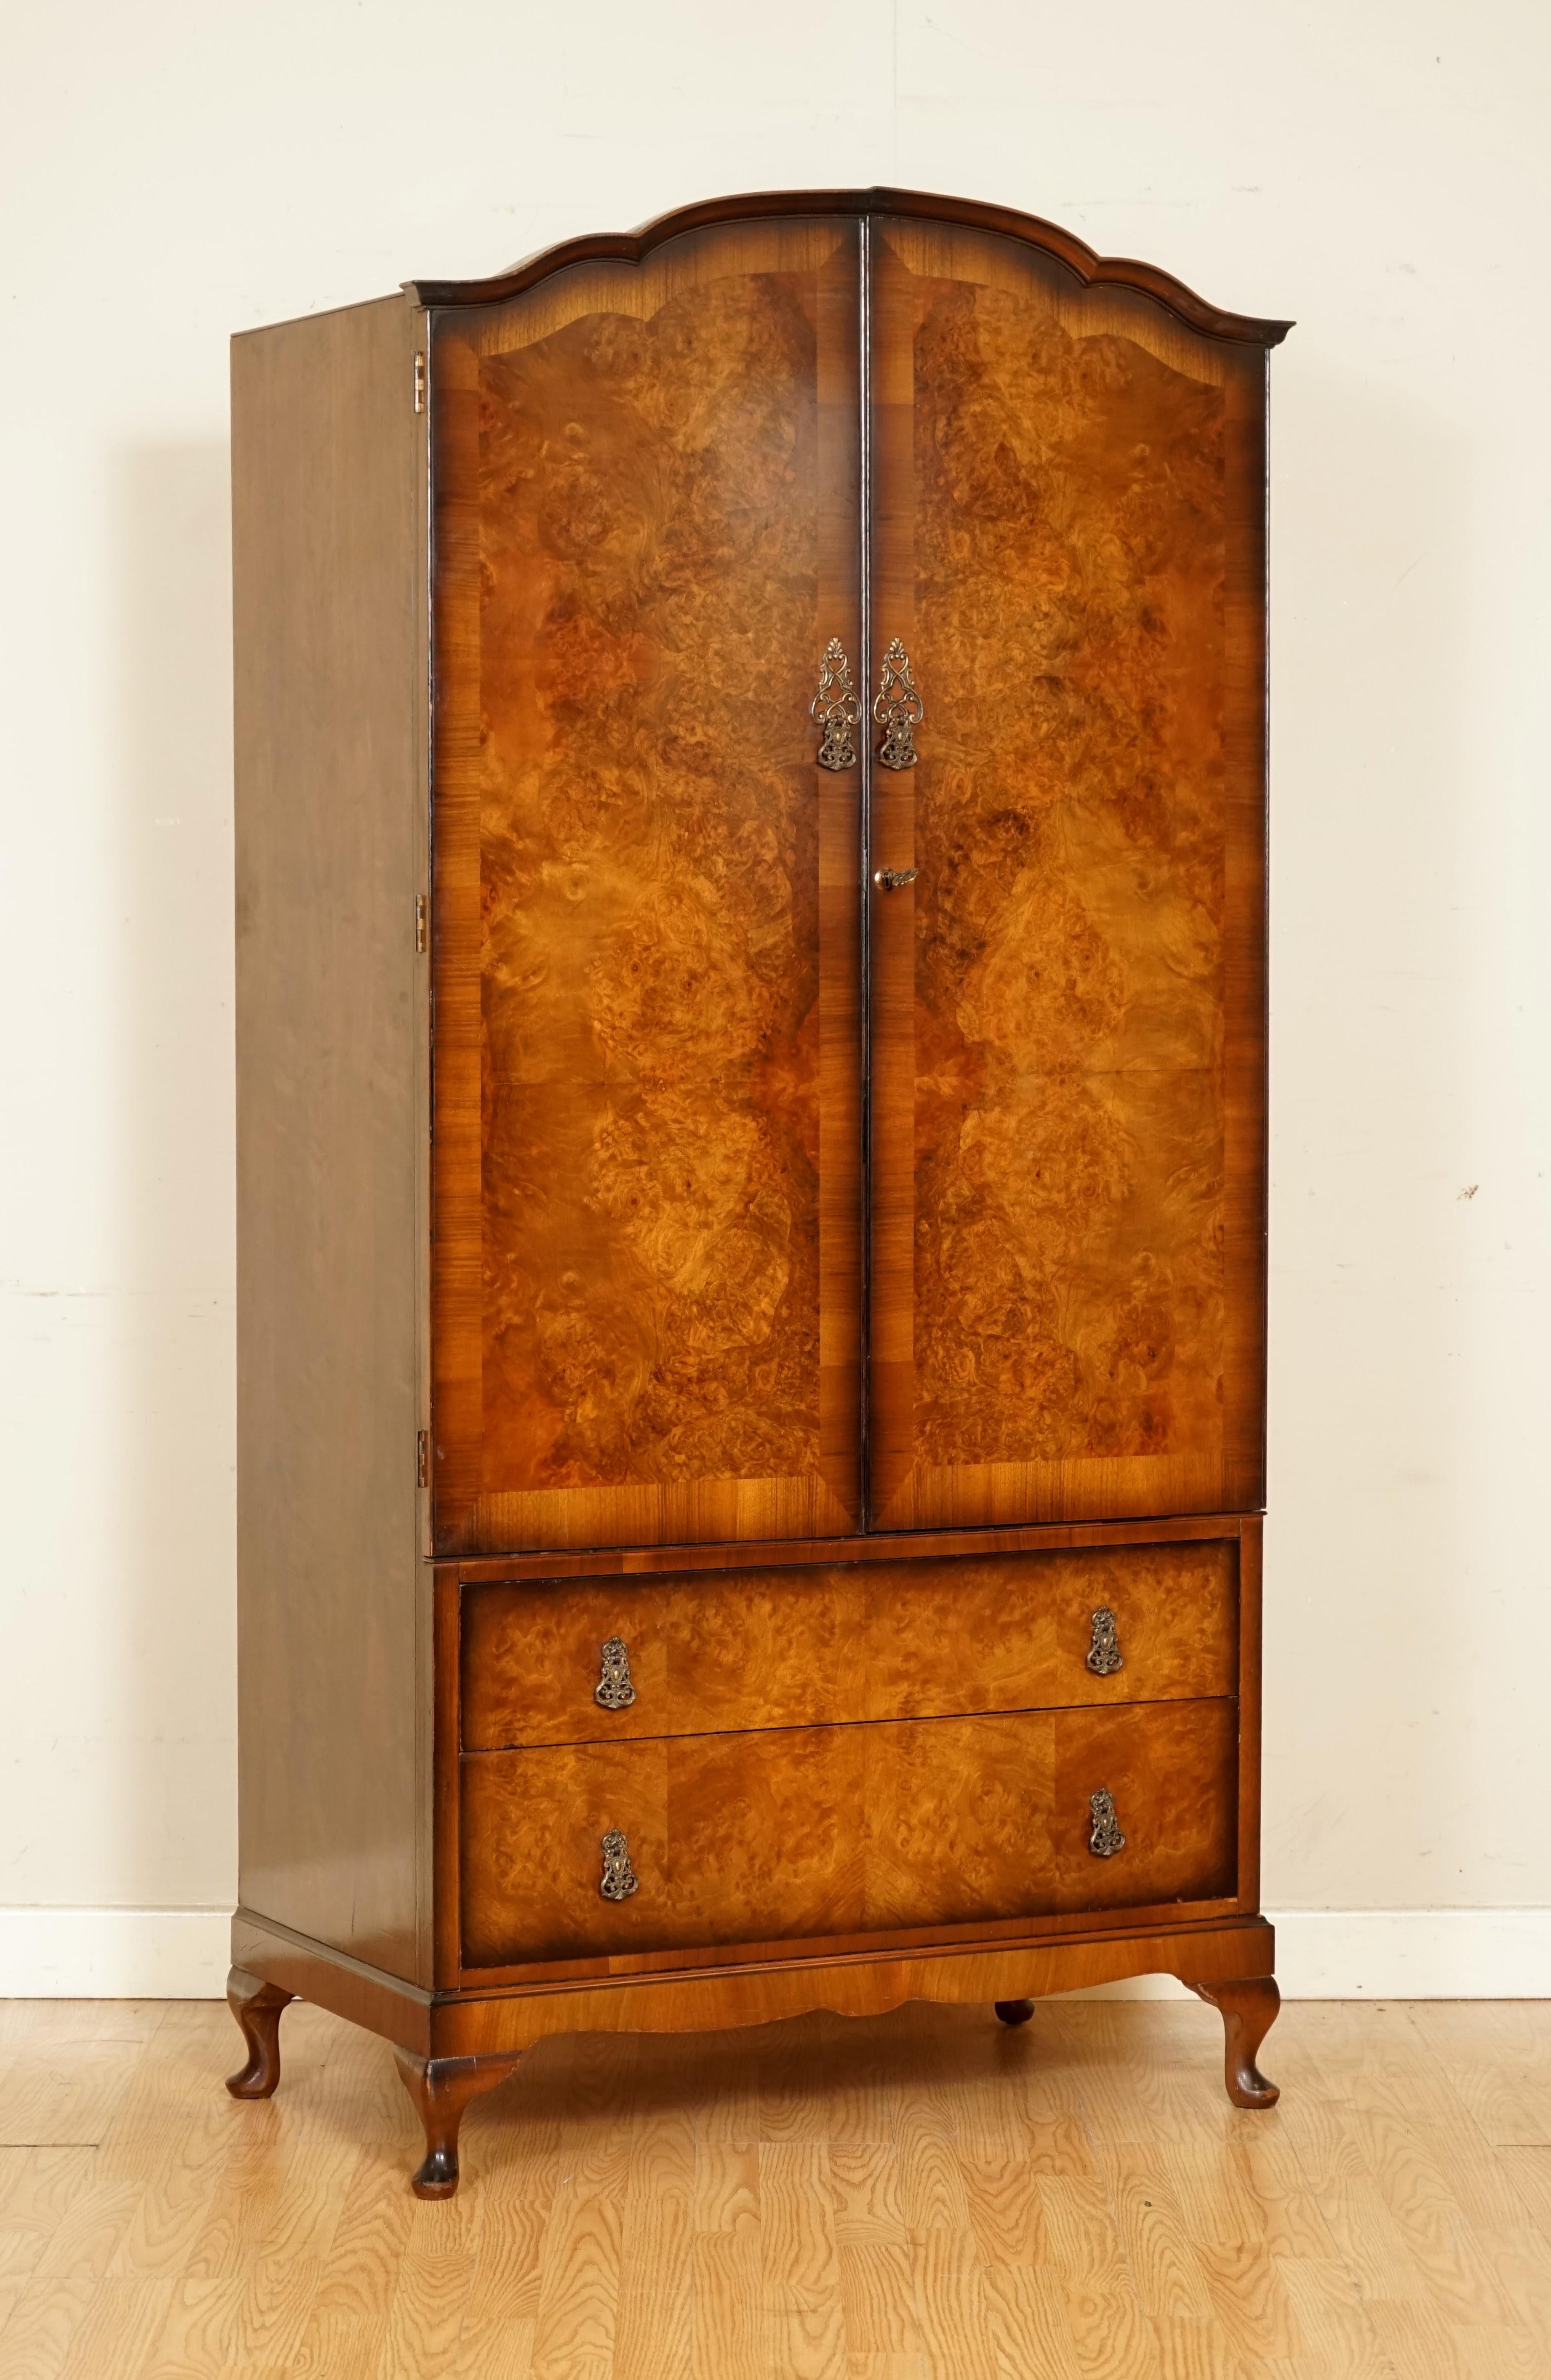 We are so excited to present to you this Art Deco Burr Walnut Wardrobe.

Inside the wardrobe there's a nice space on the left to hang items. Key is included.

On the right side there's space to put stuff away in two drawers and once compartment